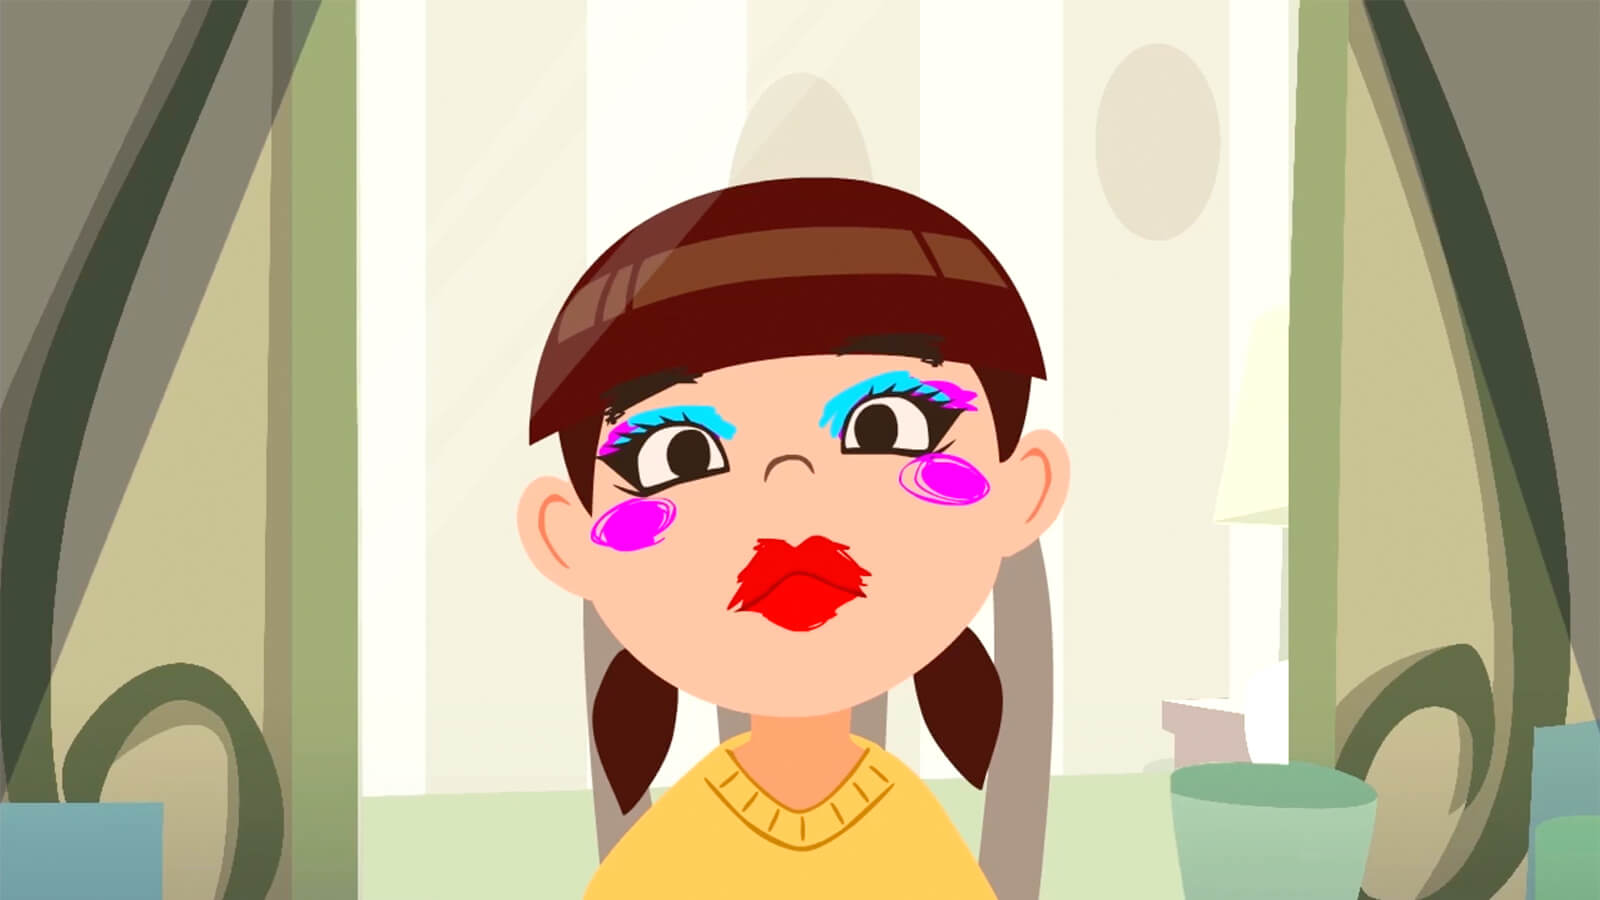 A young brown-haired girl looks in a mirror with bright pink, aqua, and red makeup applied haphazardly across her face.